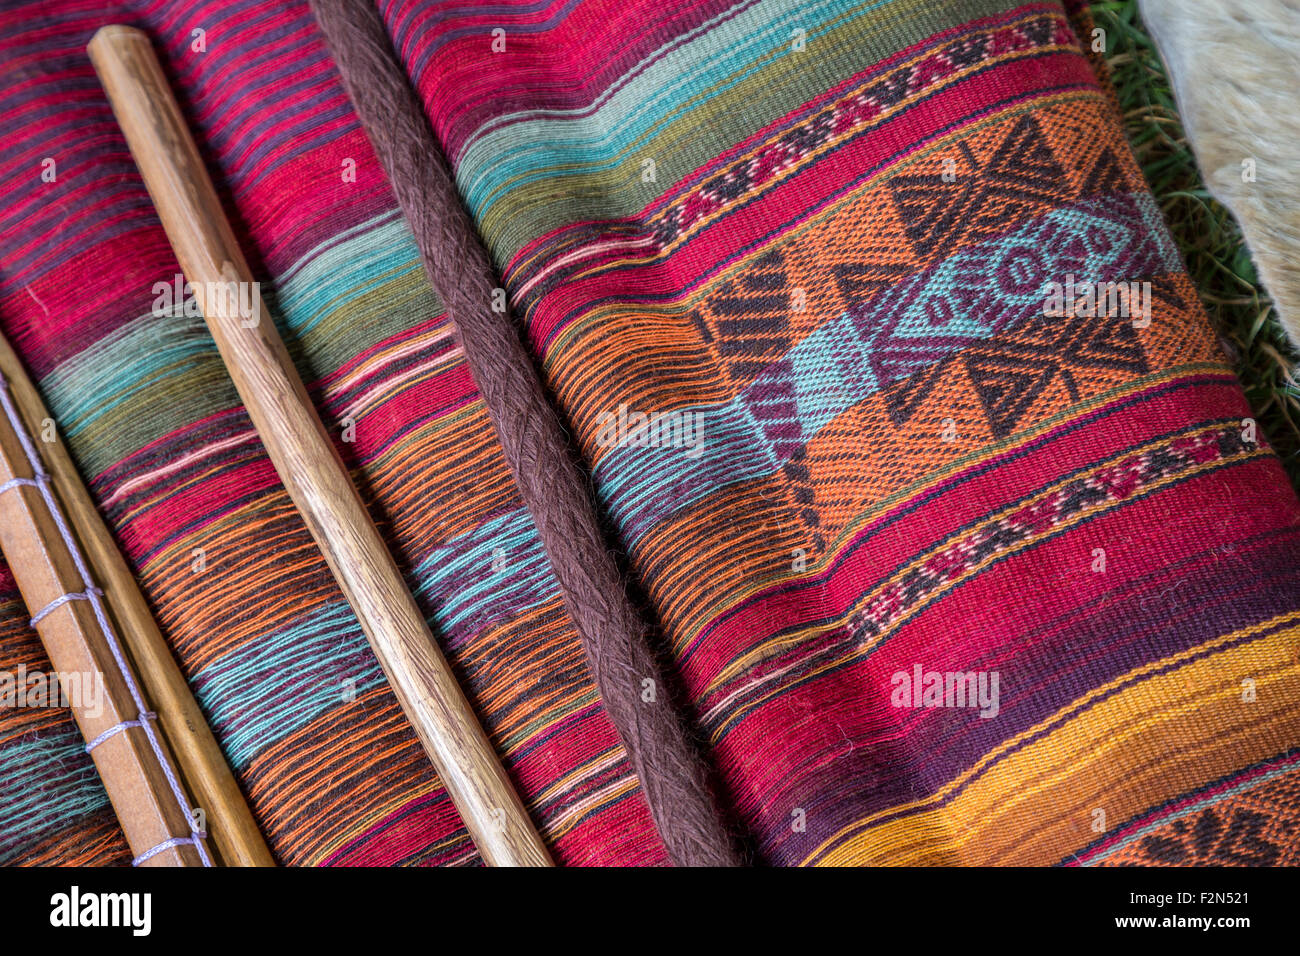 Peruvian  Poncho-style Textile by Weaver from Cusco. Stock Photo